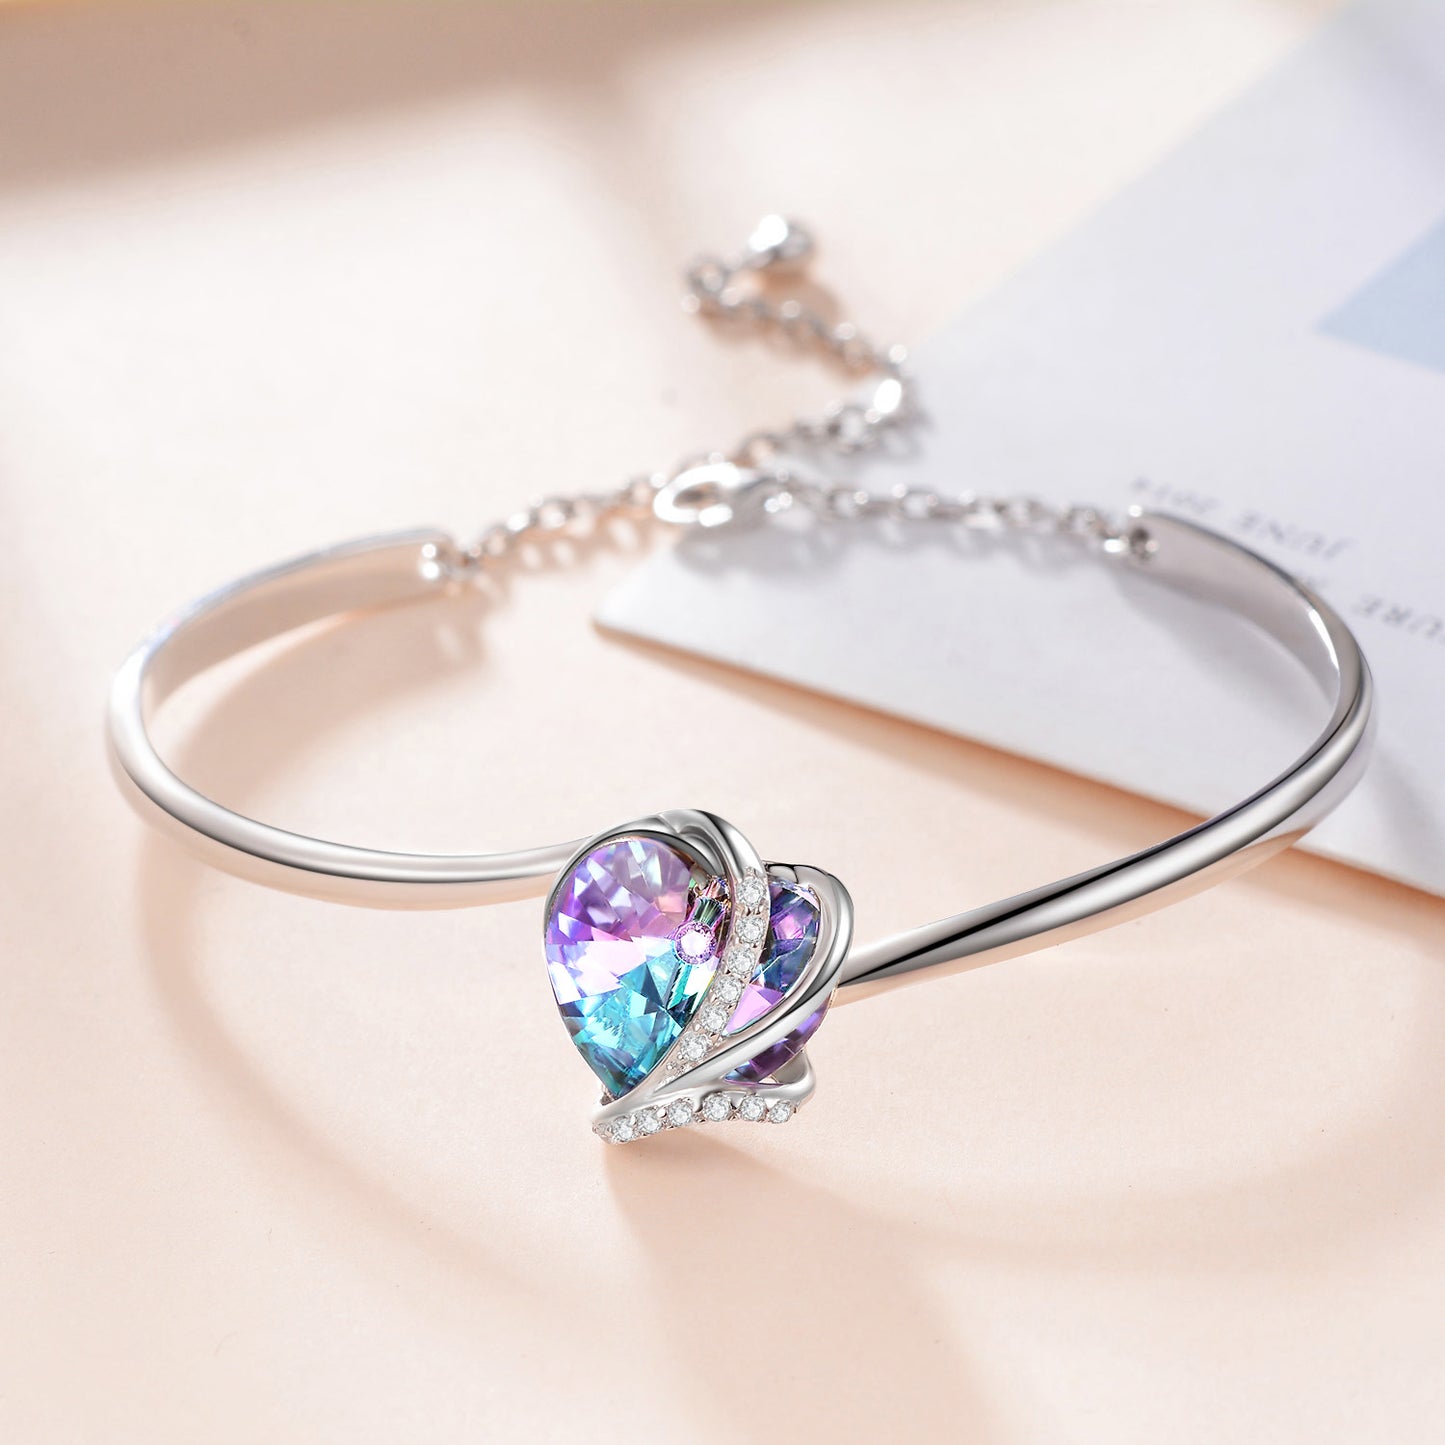 925 Sterling Silver Love Heart Adjustable Bangle Bracelet with Crystals-I Love You Hypoallergenic Fine Jewelry